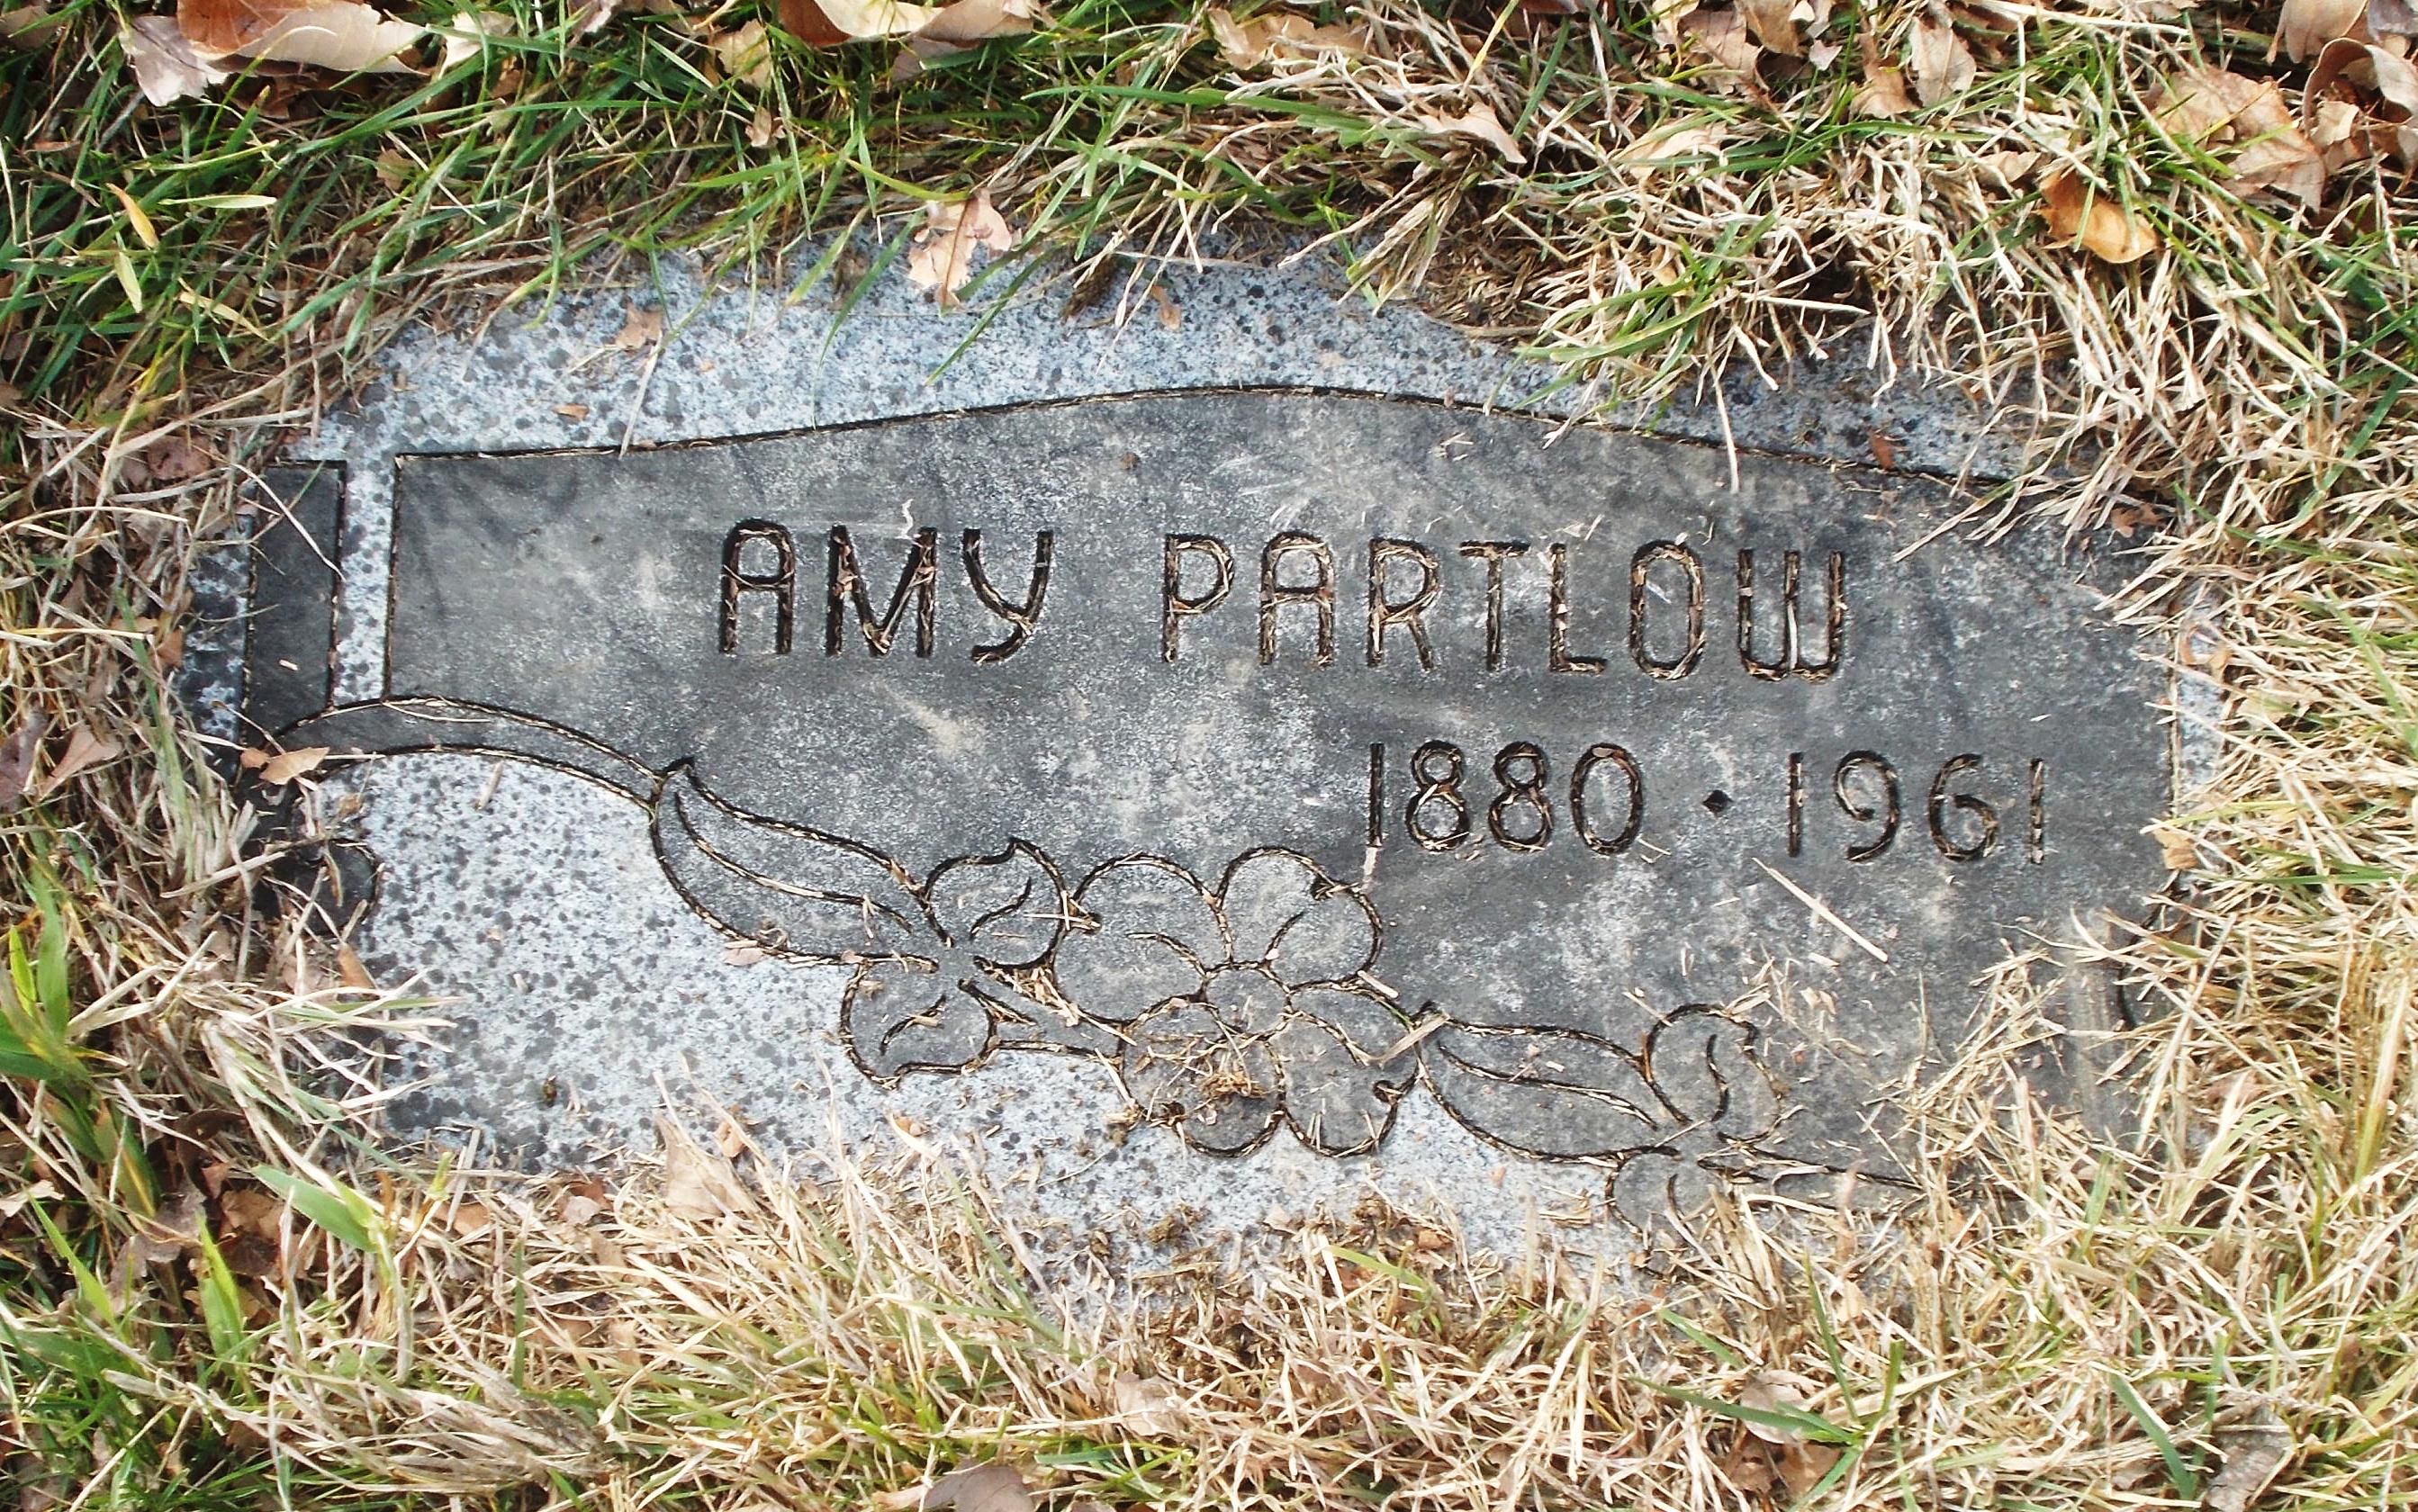 Amy Partlow